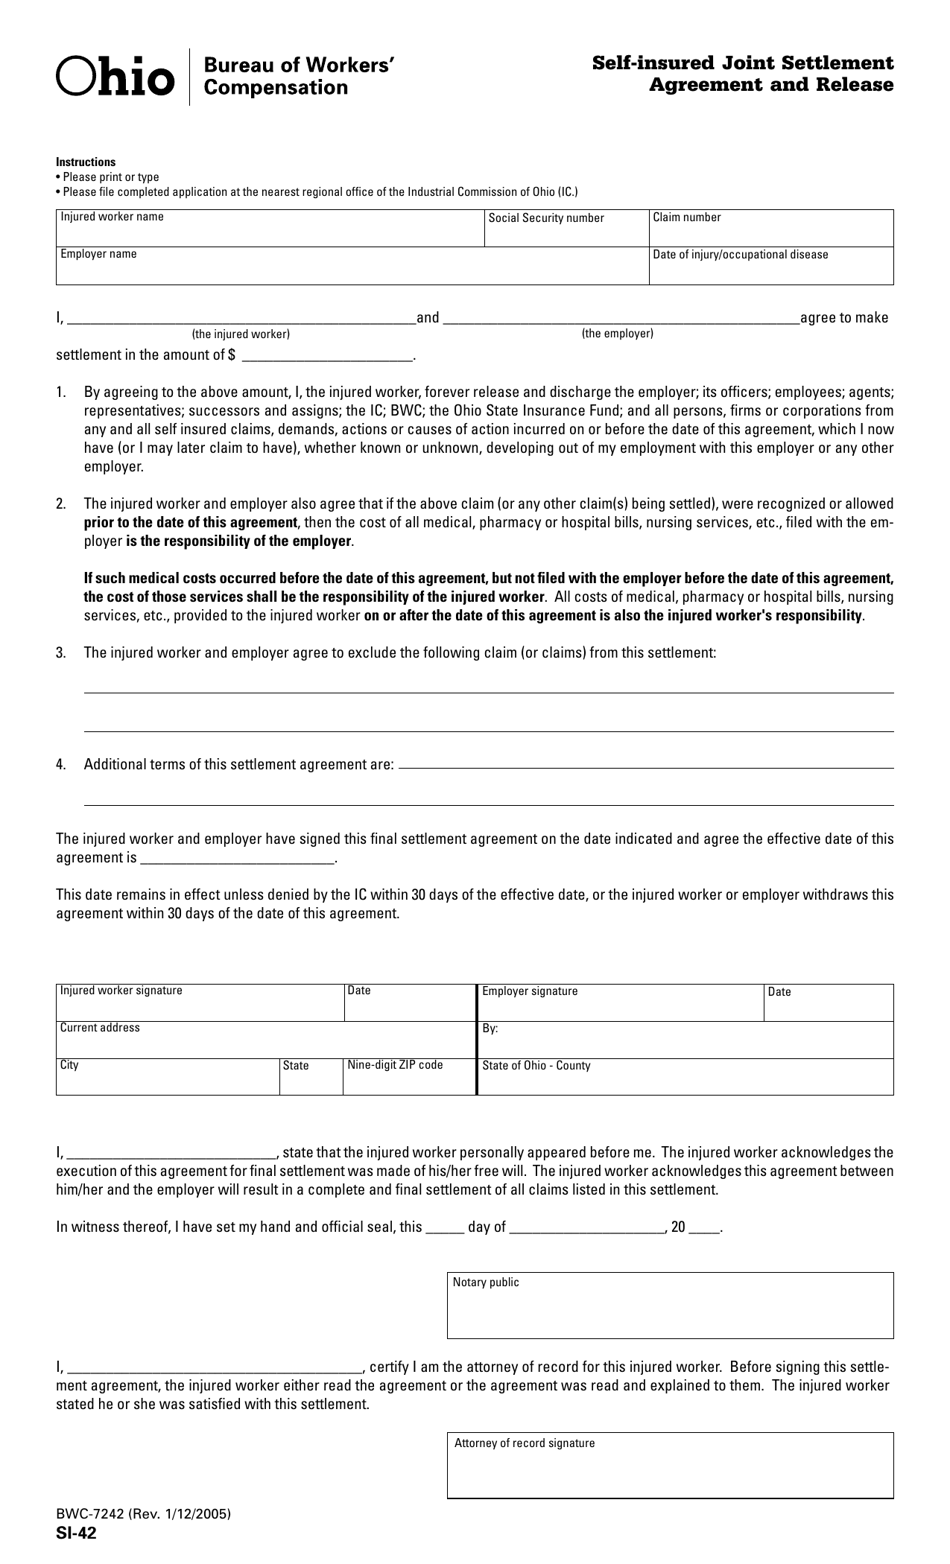 Form SI-42 (BWC-7242) Self-insured Joint Settlement Agreement and Release - Ohio, Page 1